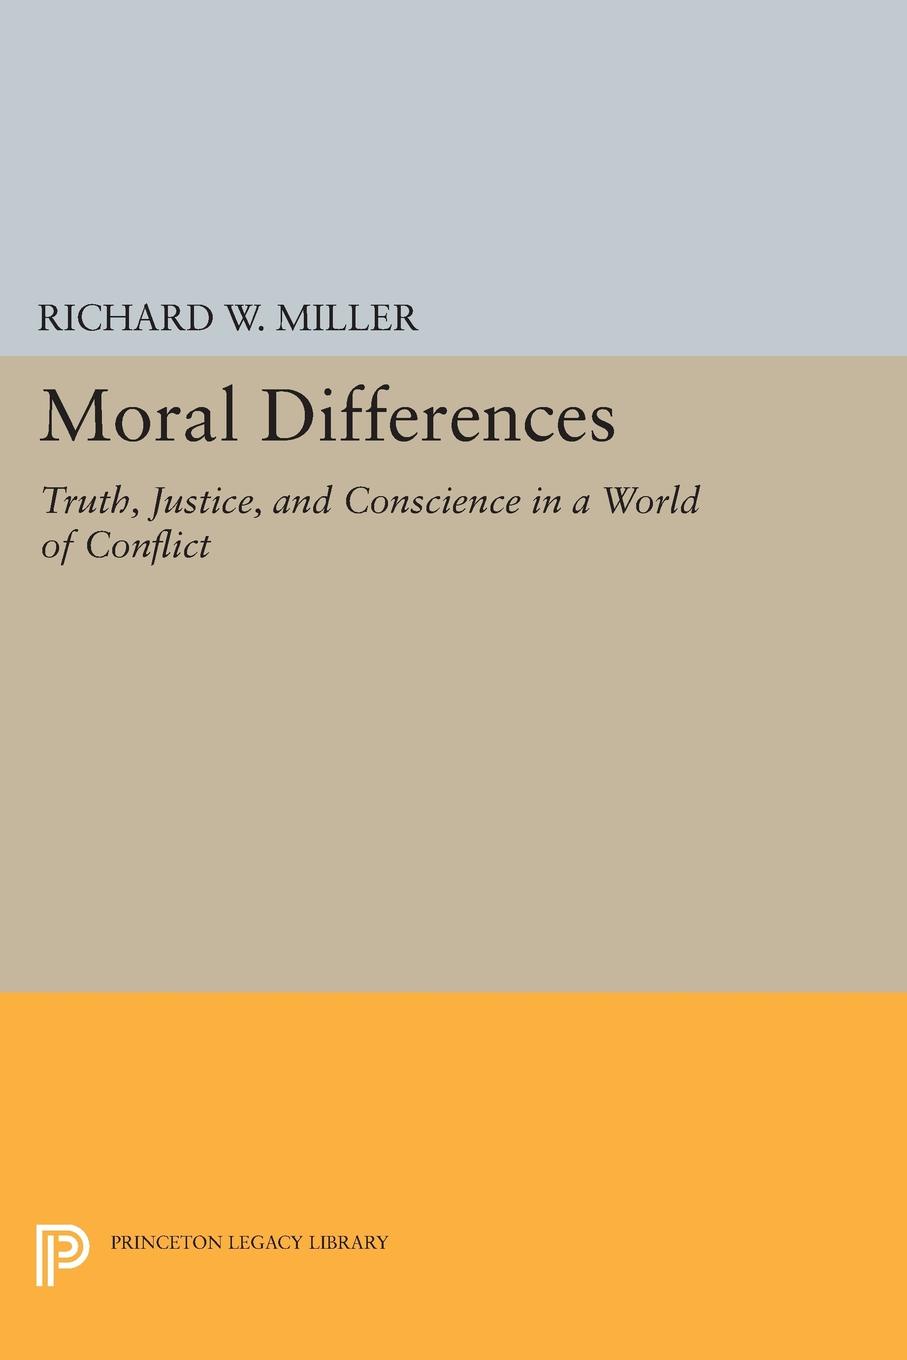 Moral Differences. Truth, Justice, and Conscience in a World of Conflict